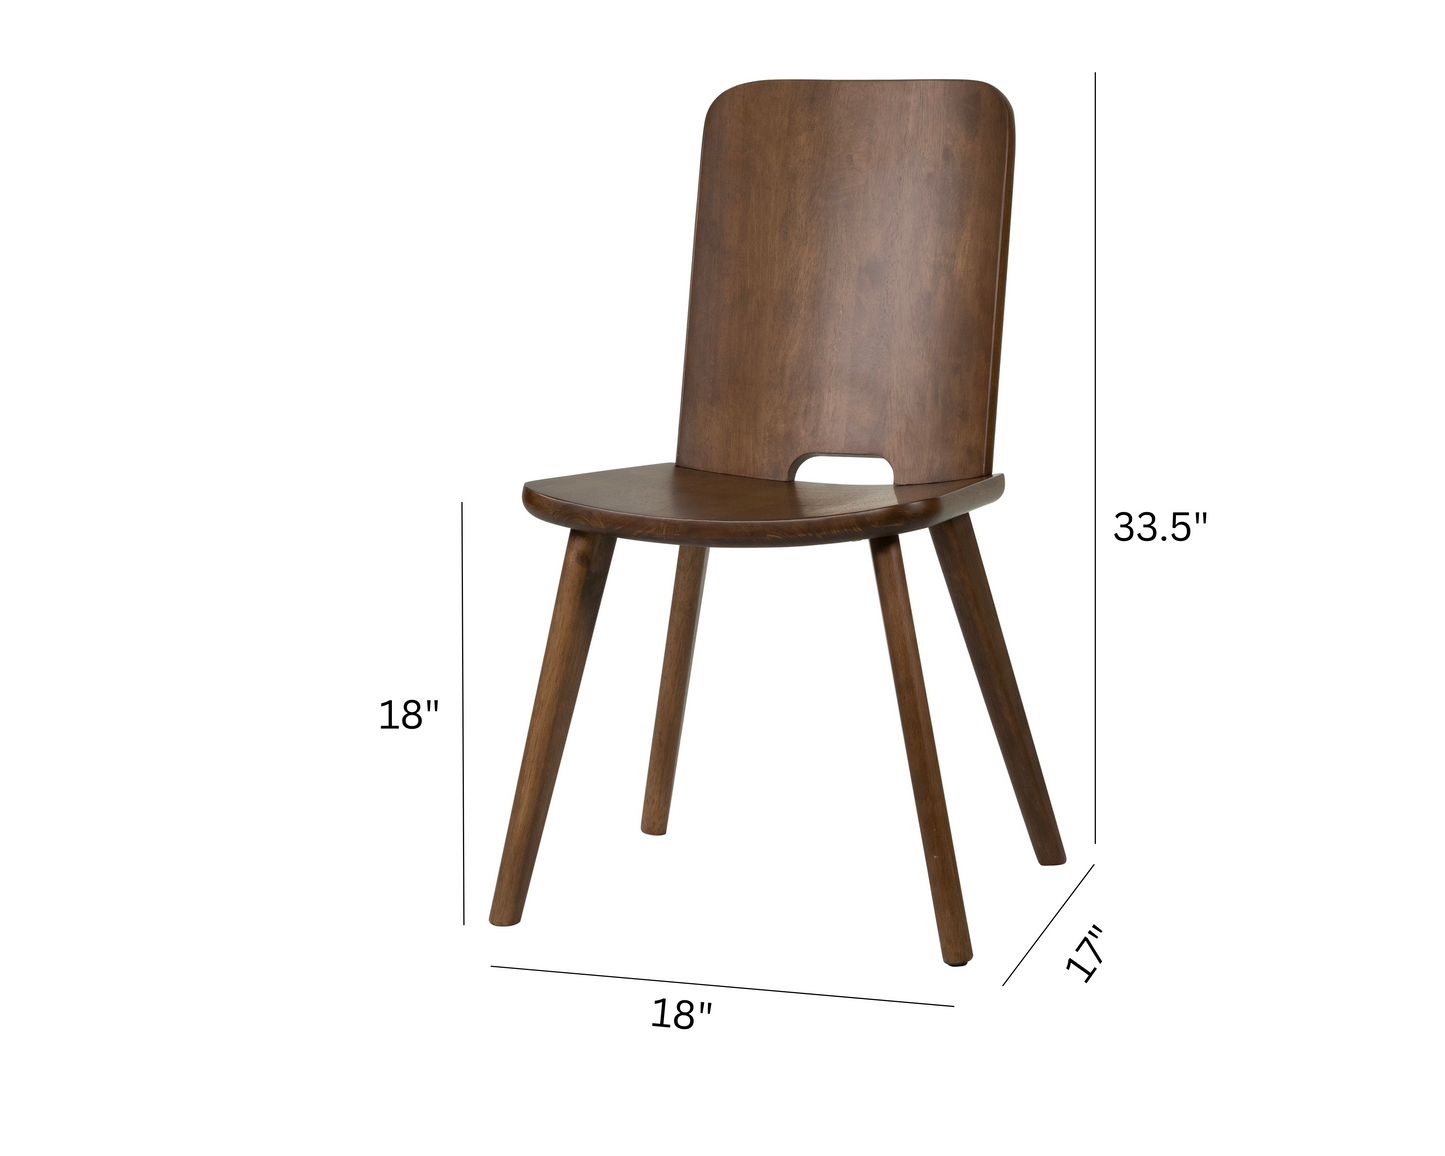 Jo Dining Chair (Set of 2)